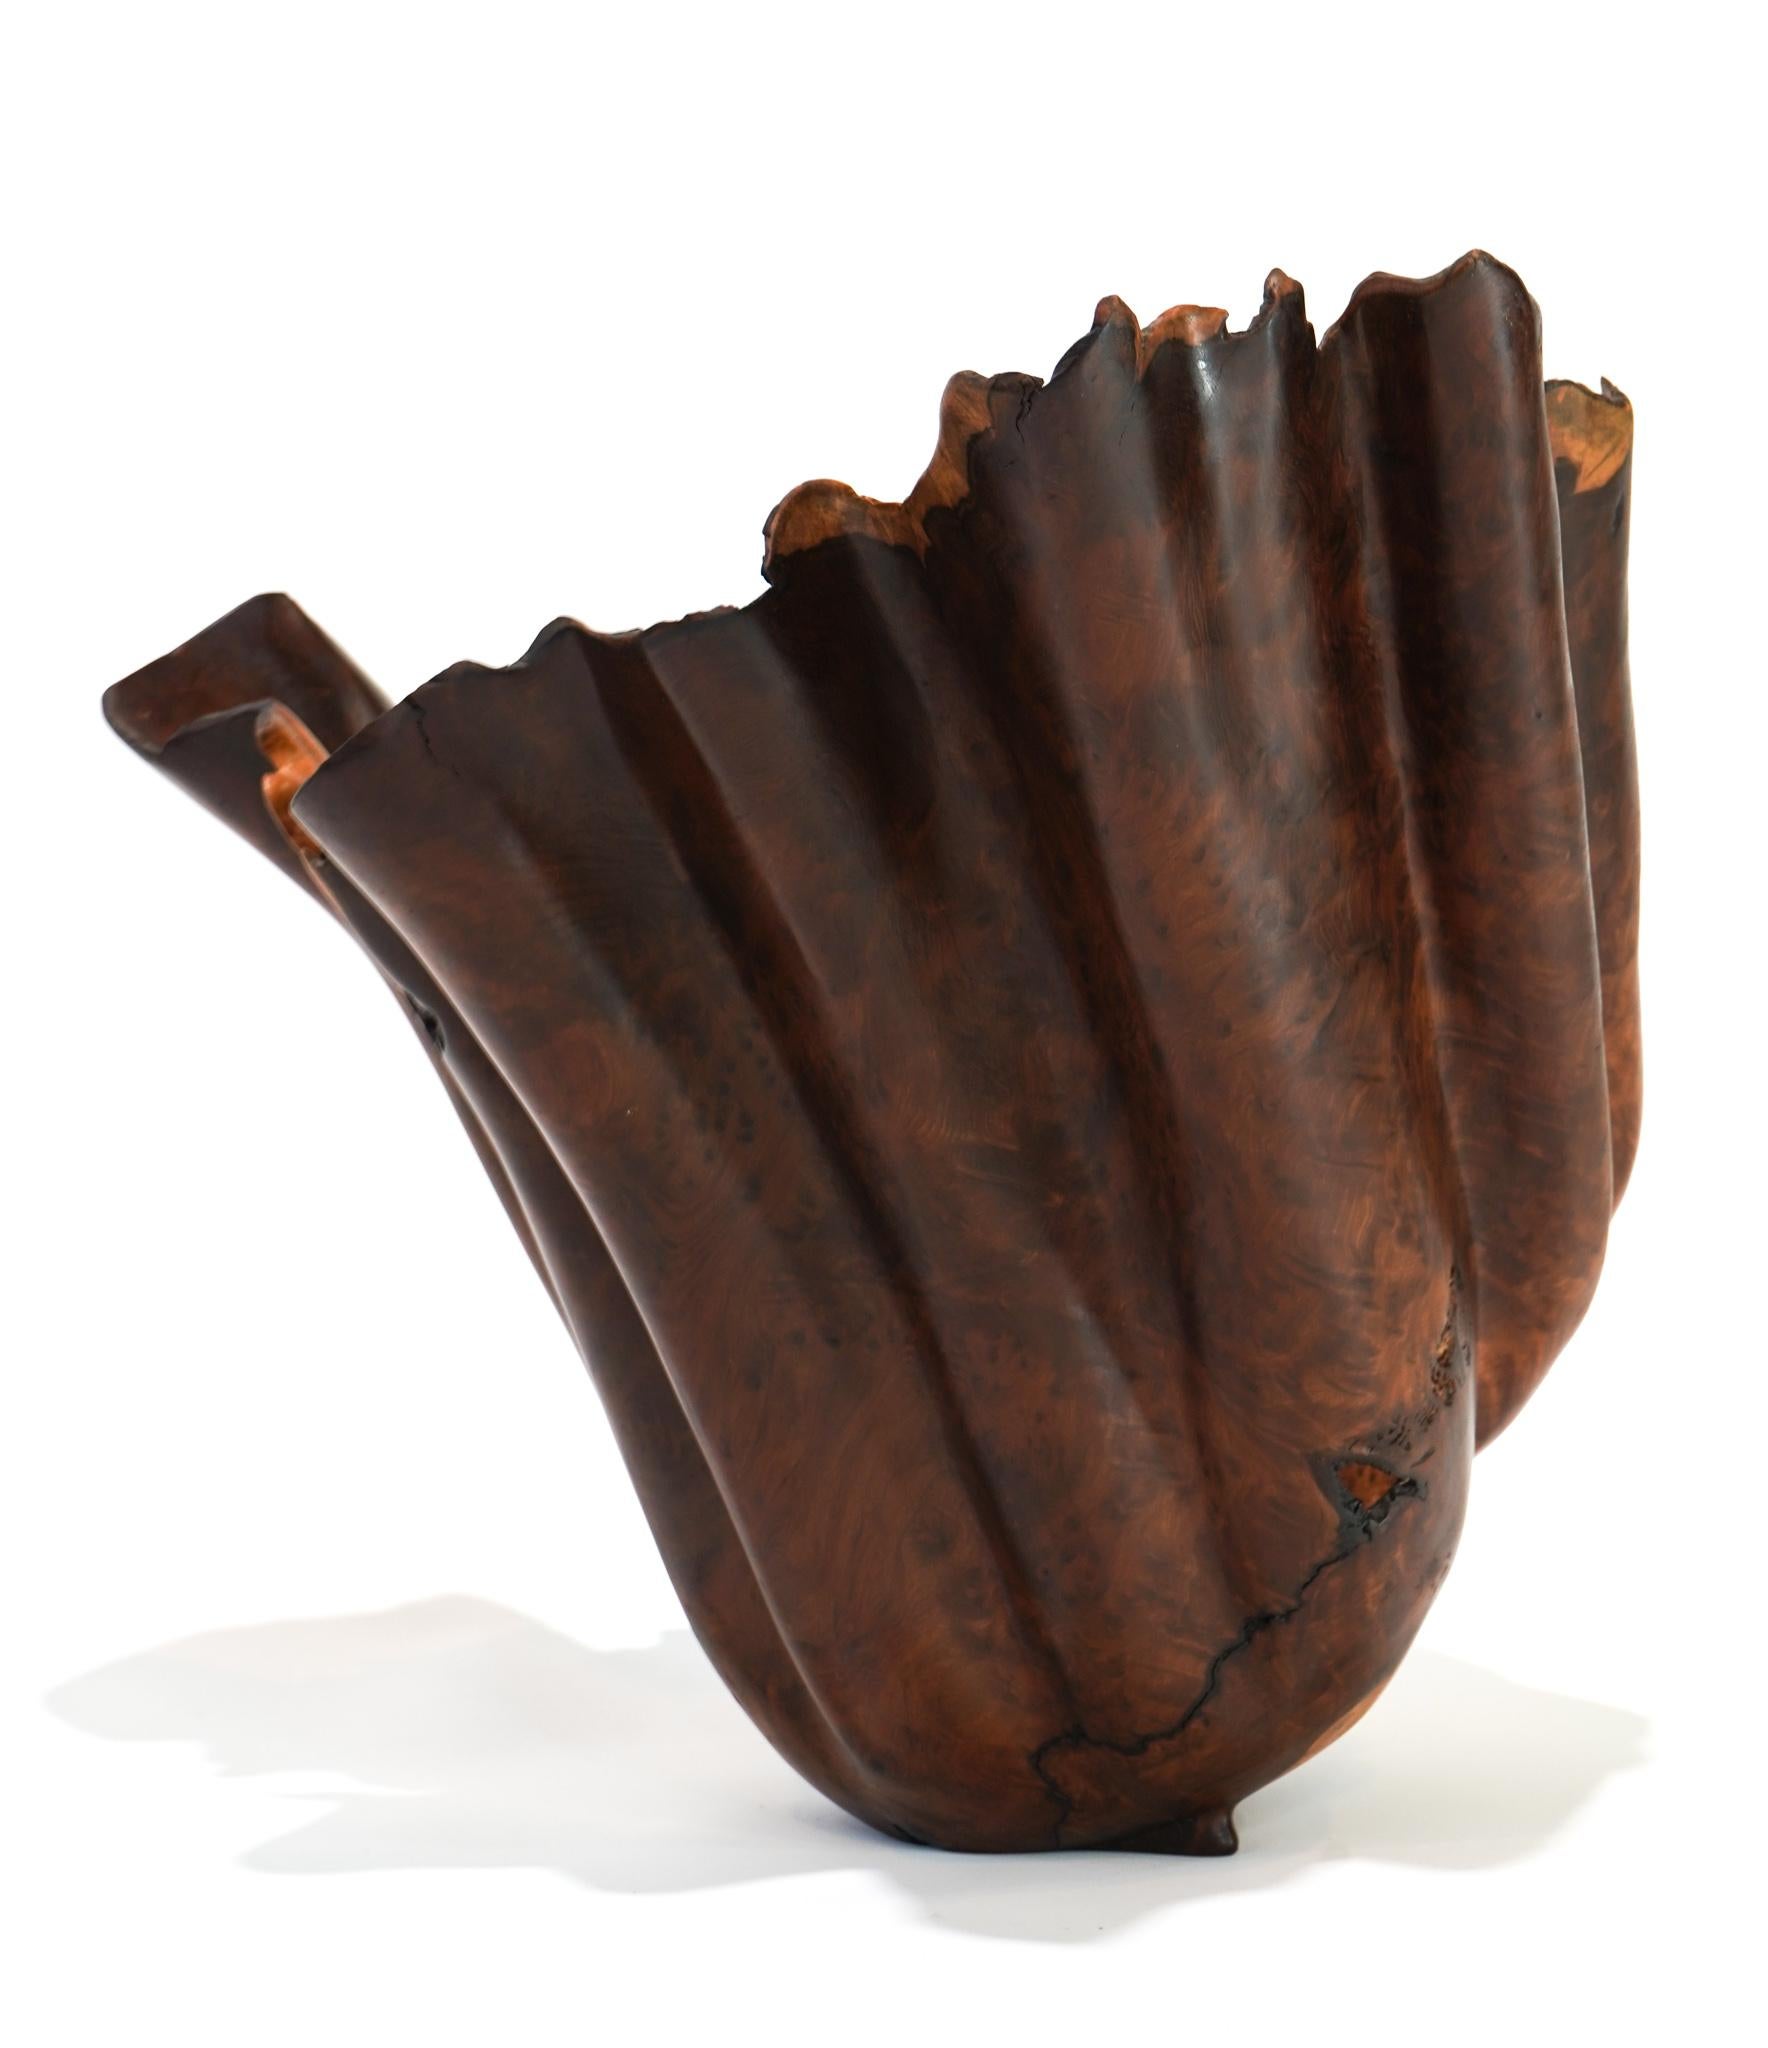 20th Century Brad Sells Organic Modern Redwood Abstract Vessel Sculpture 1997 For Sale